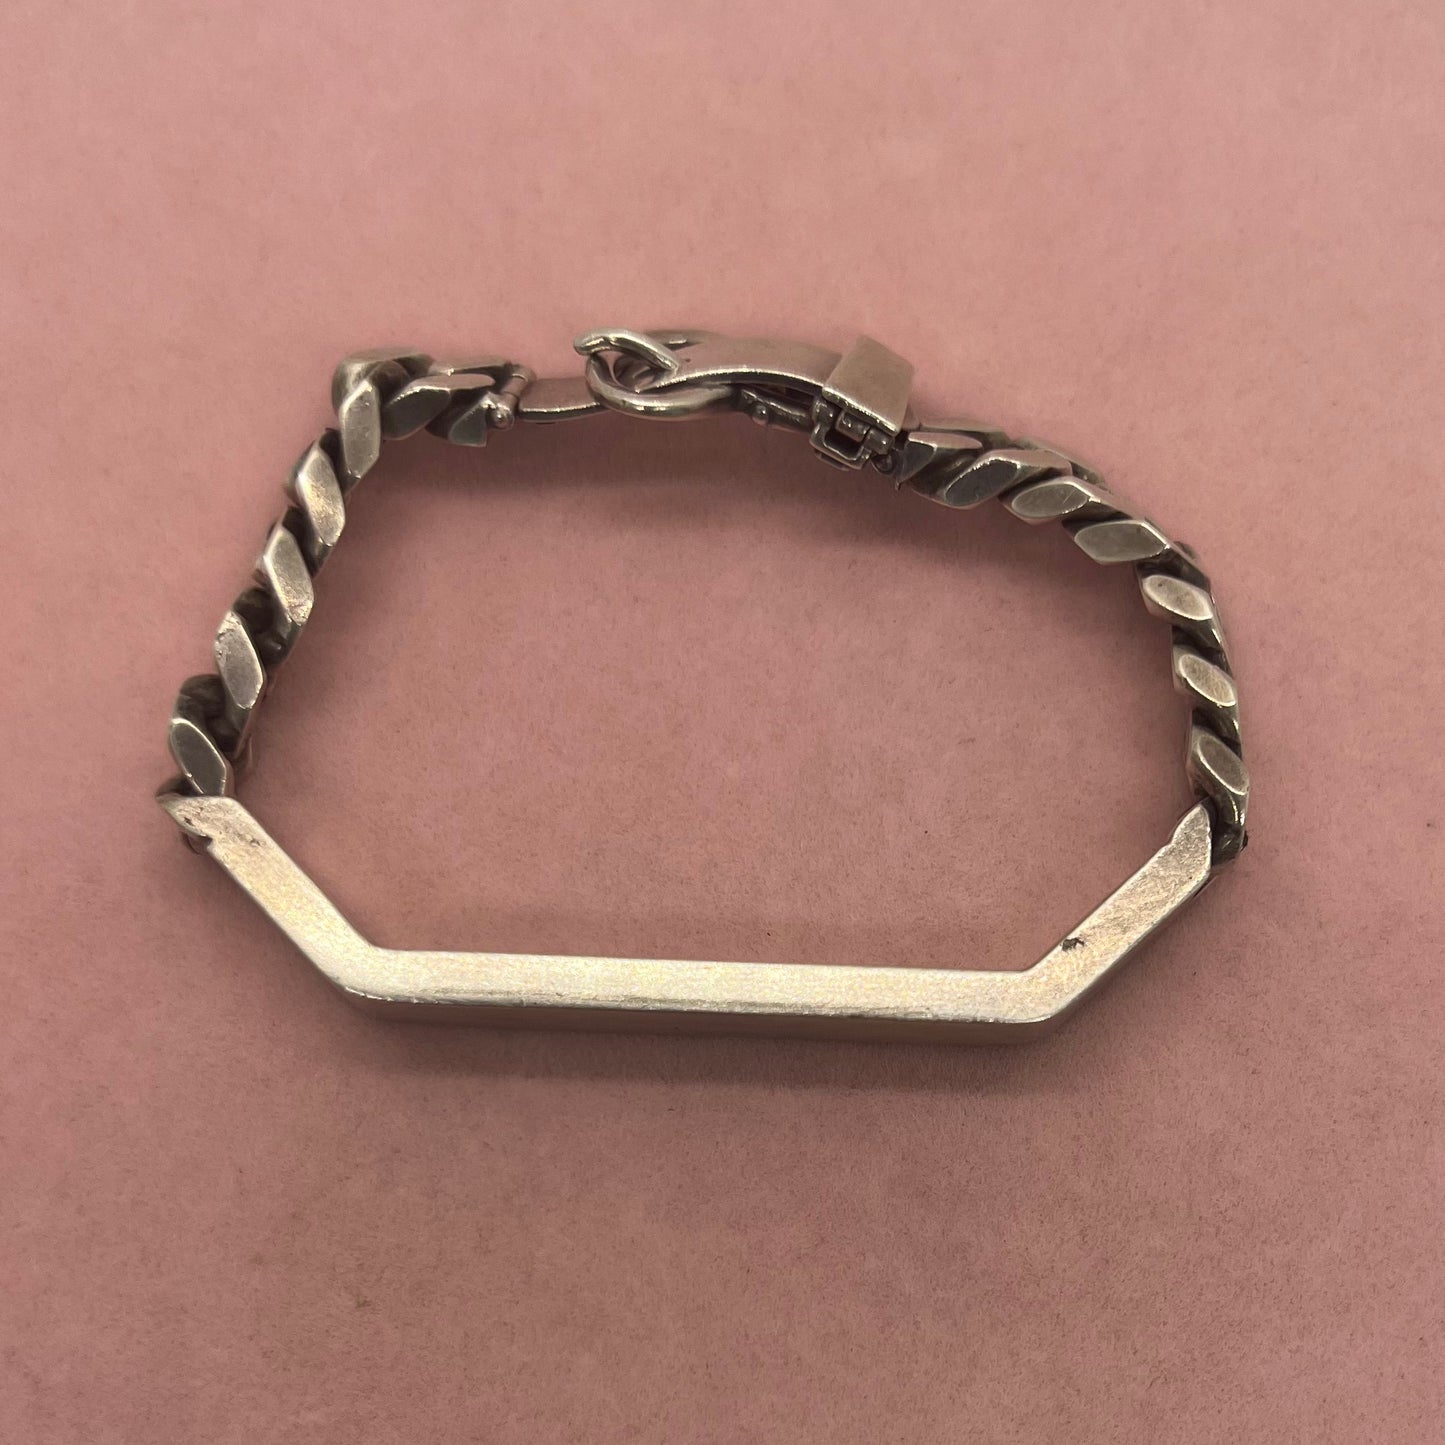 Curb Link Belt Buckle Bracelet by Uno a Erre